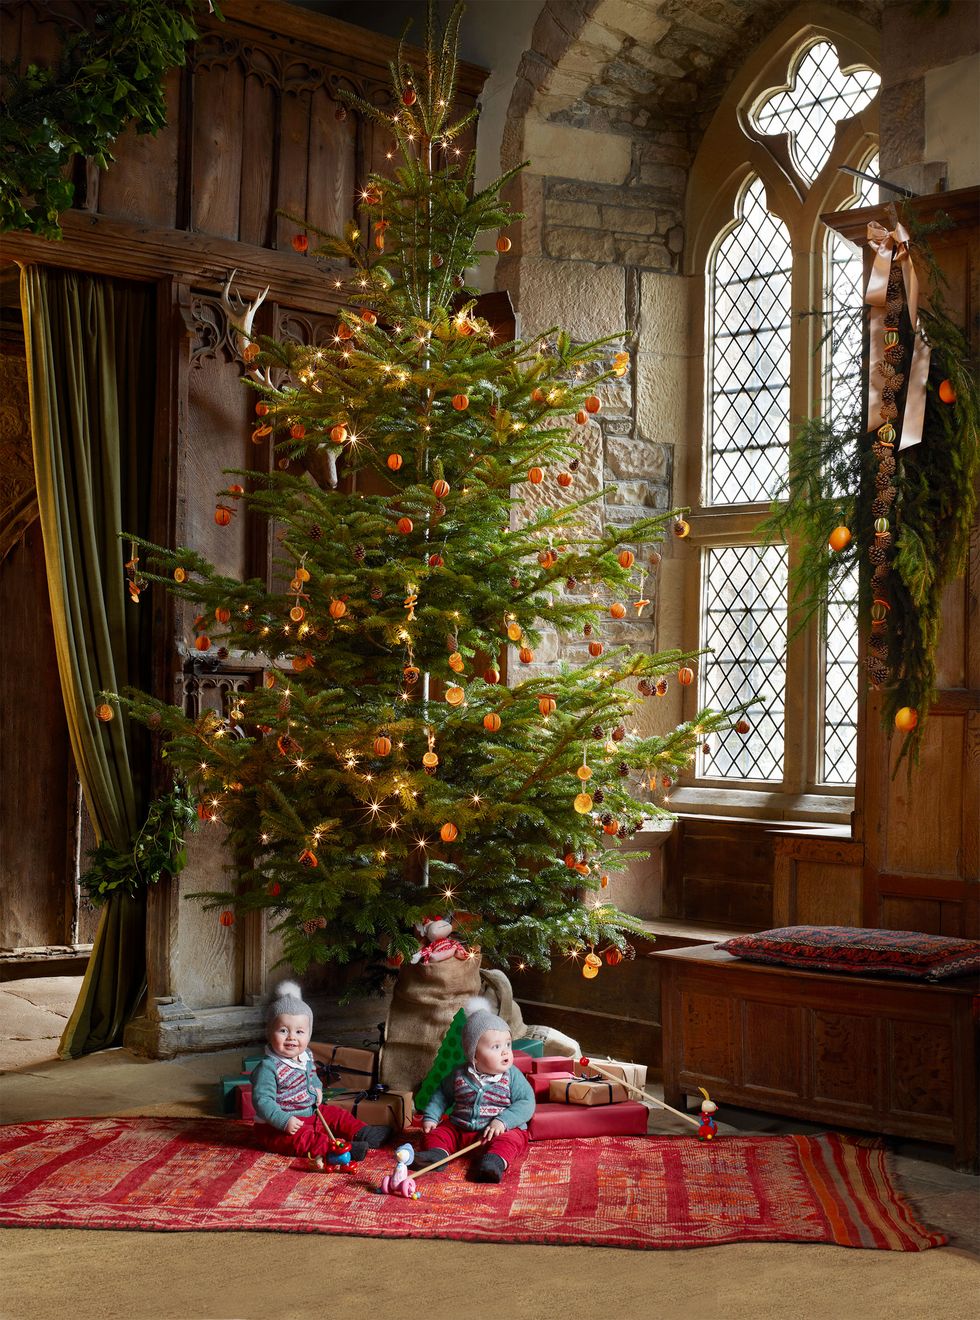 Twin children wearing blue sweaters with matching hats and pompoms sit next to a Christmas tree in an English country house